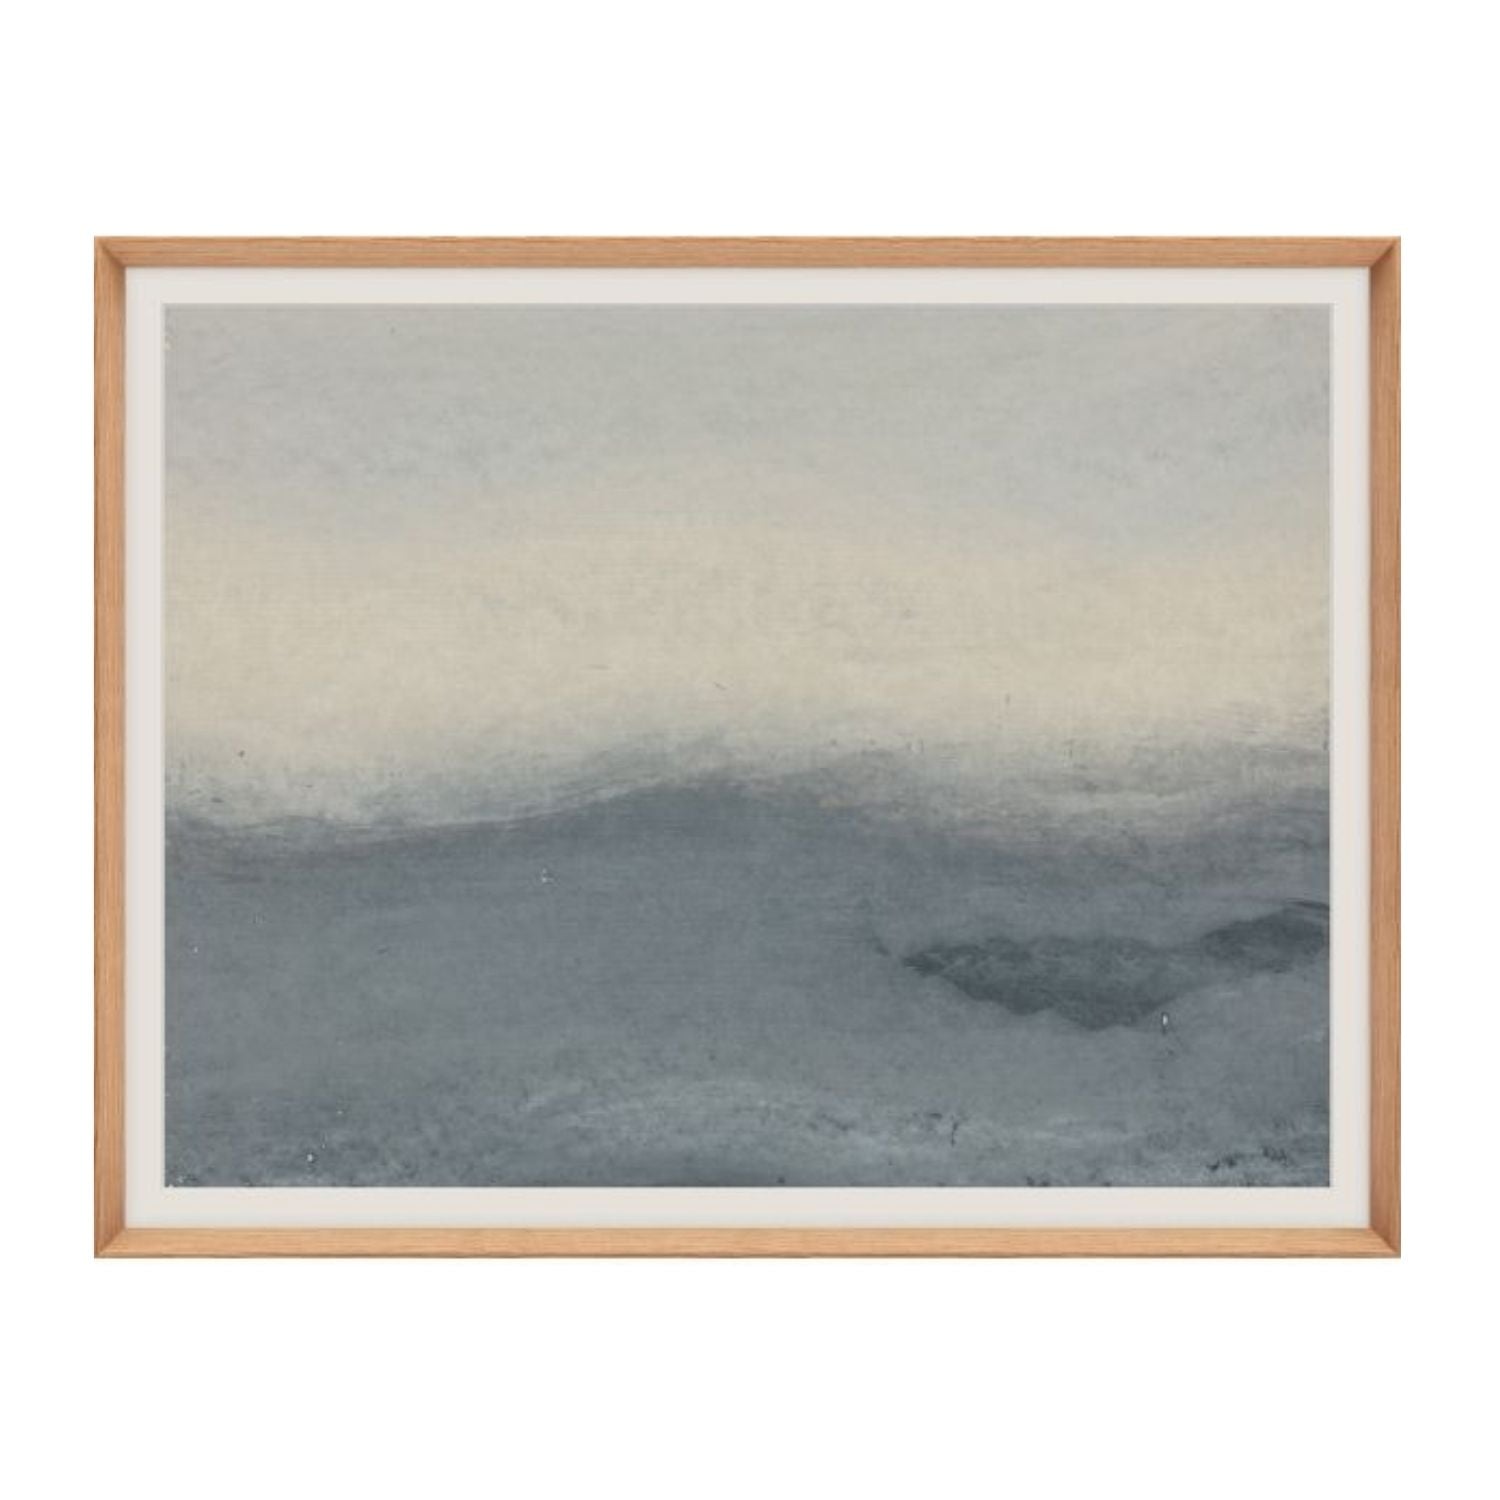 Ethereal Landscape, Small 5